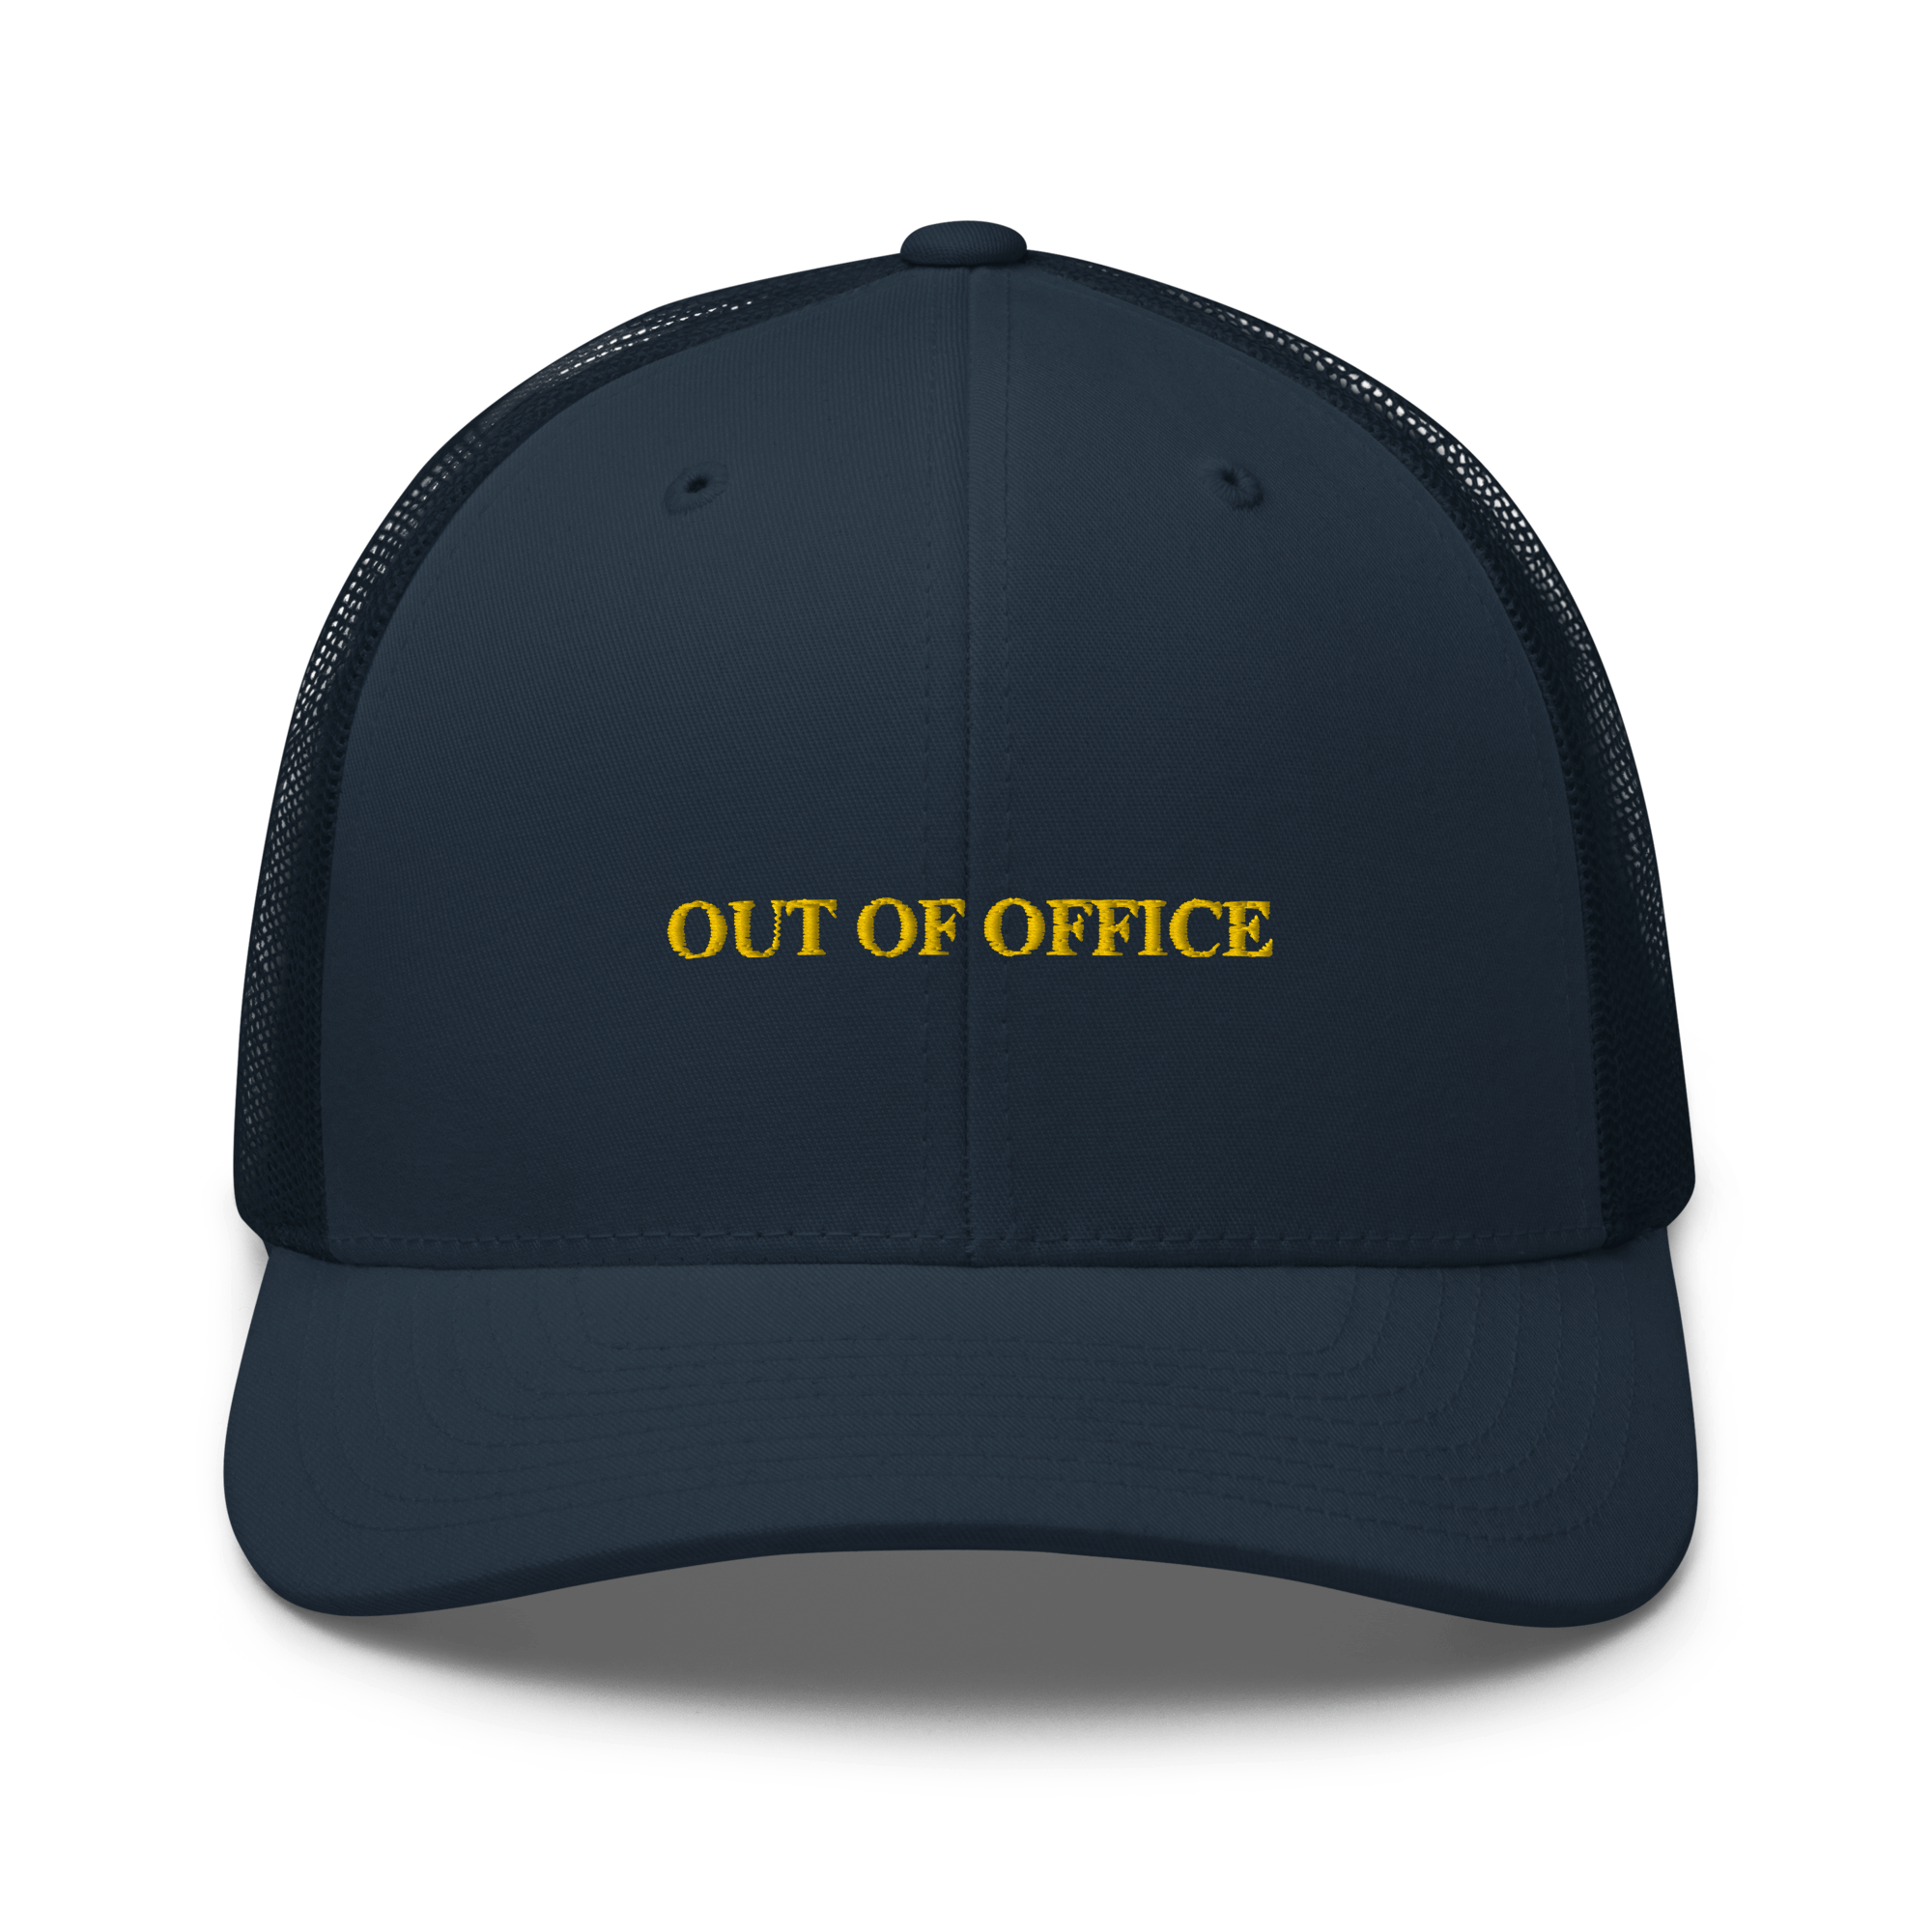 OUT OF OFFICE Trucker Cap, Navy